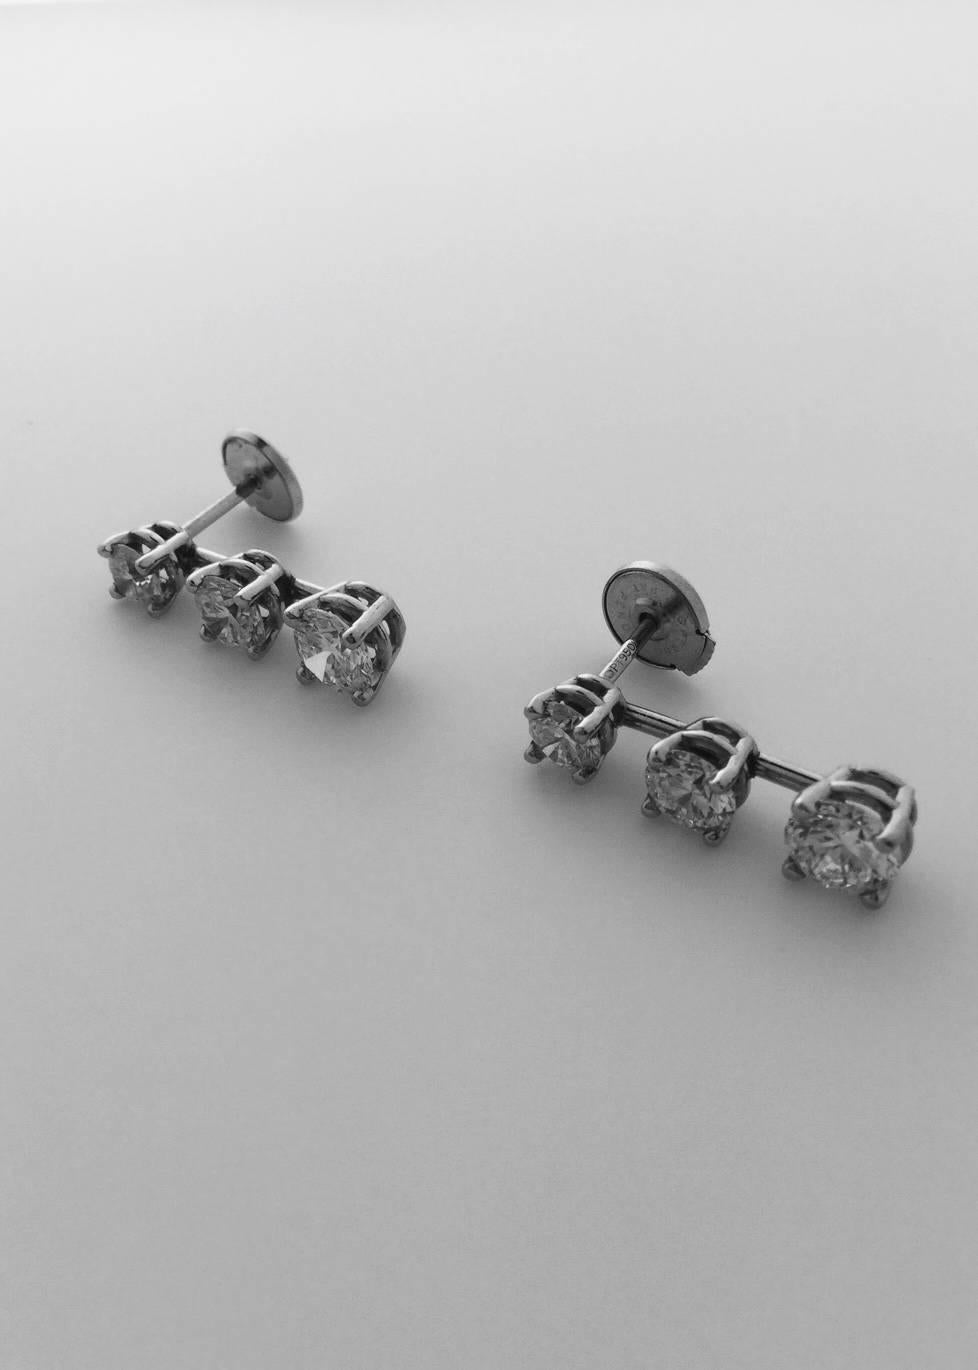 Platinum earrings contains each 3 graduated round brilliant cut diamonds, total 6 diamonds weighing combined 2.15 carats.
2 Diamonds=0.47 carat G-H color/SI1
2 Diamonds=0.72 carat G-H color/SI1
2 Diamonds=0.96 carat G-H color/SI1
Handmade in